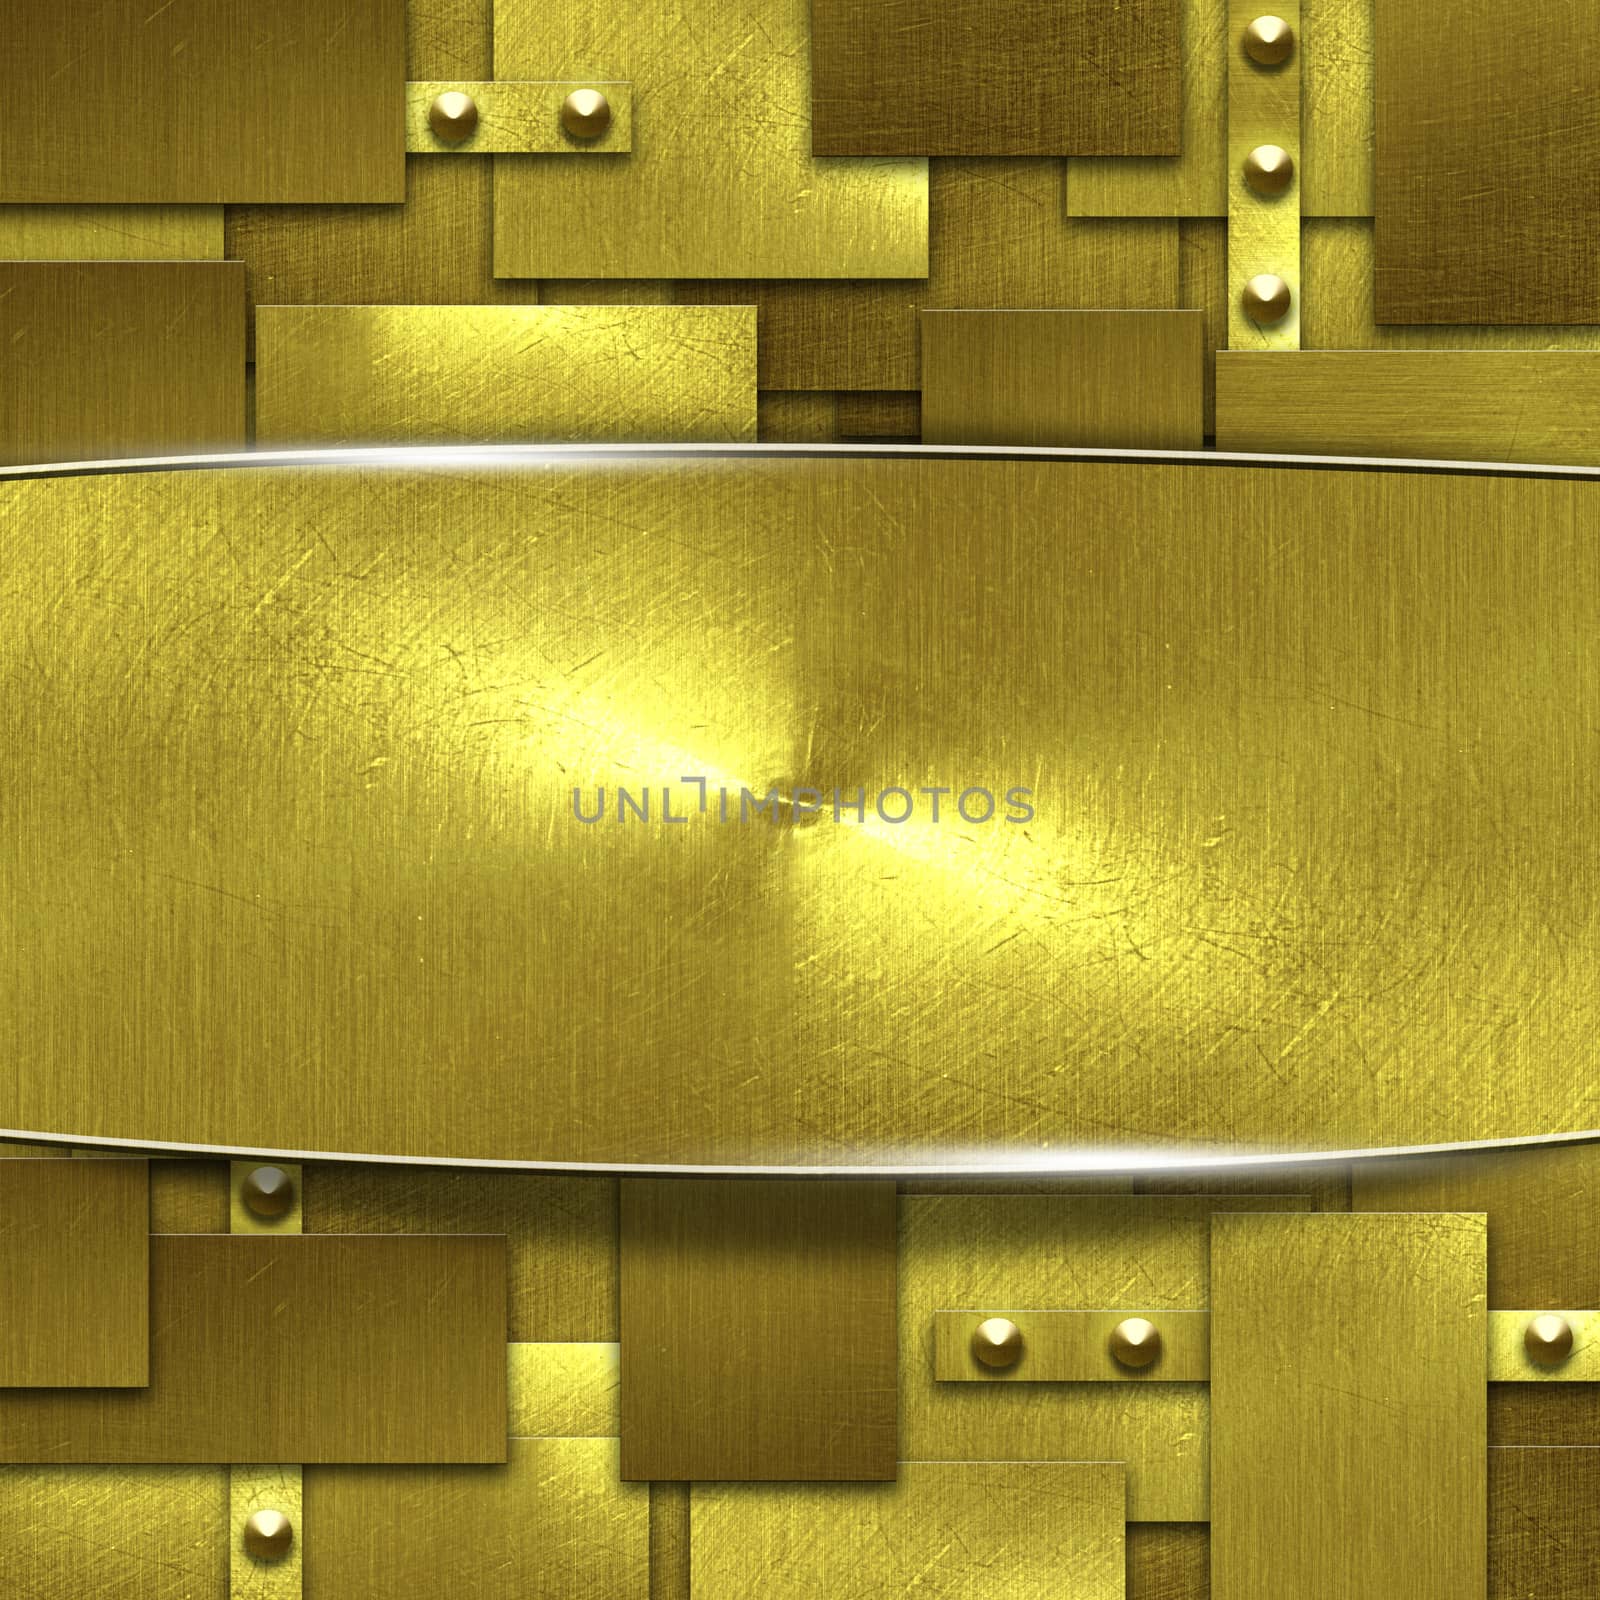 shiny gold fix wall and signboard. gold background and texture. 3d illustration.